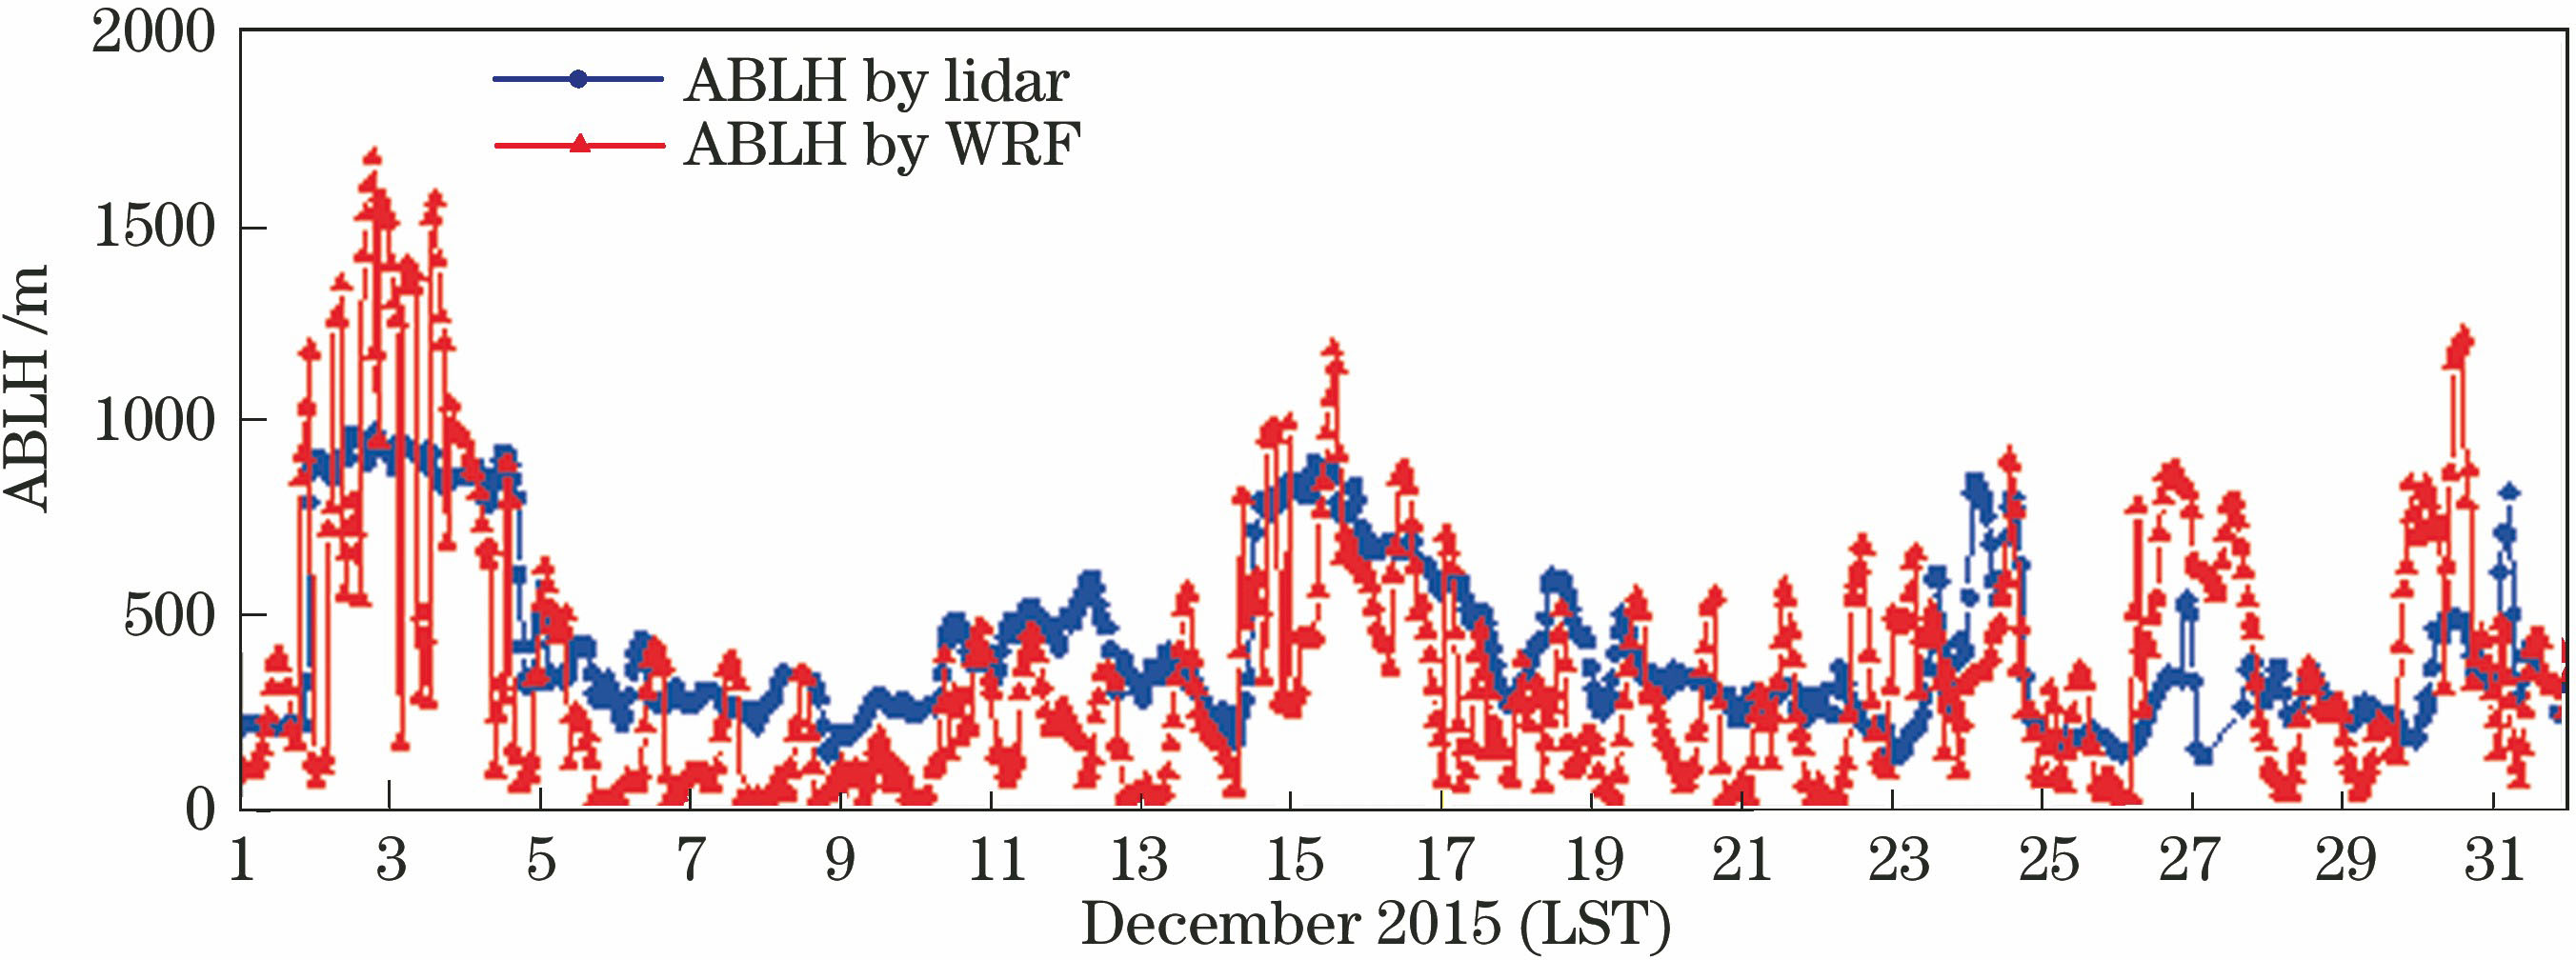 Comparison of ABLH results between lidar inversion and WRF simulation